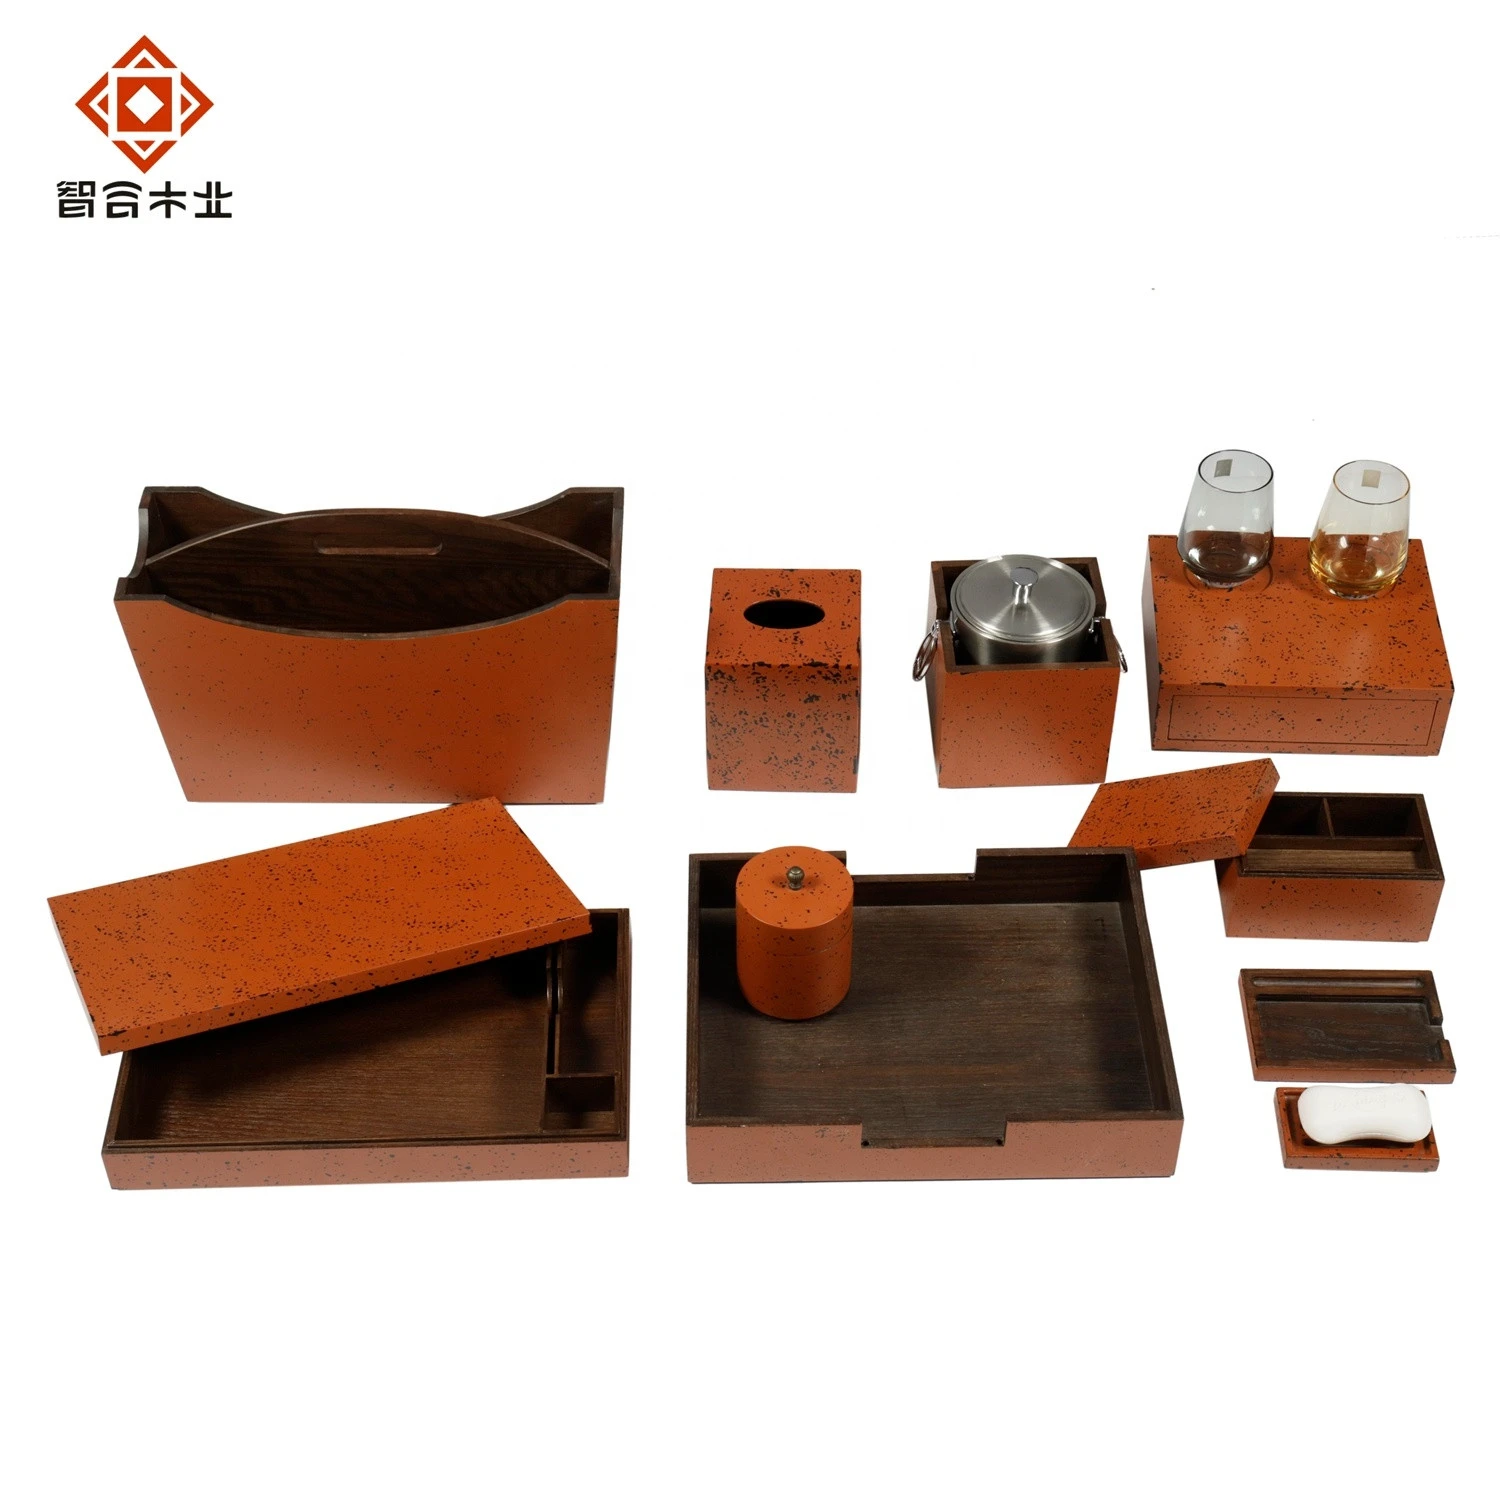 Wholesale Custom 5 Star Hotel Guest Room Wooden Hotel Amenities Supplies Products Set